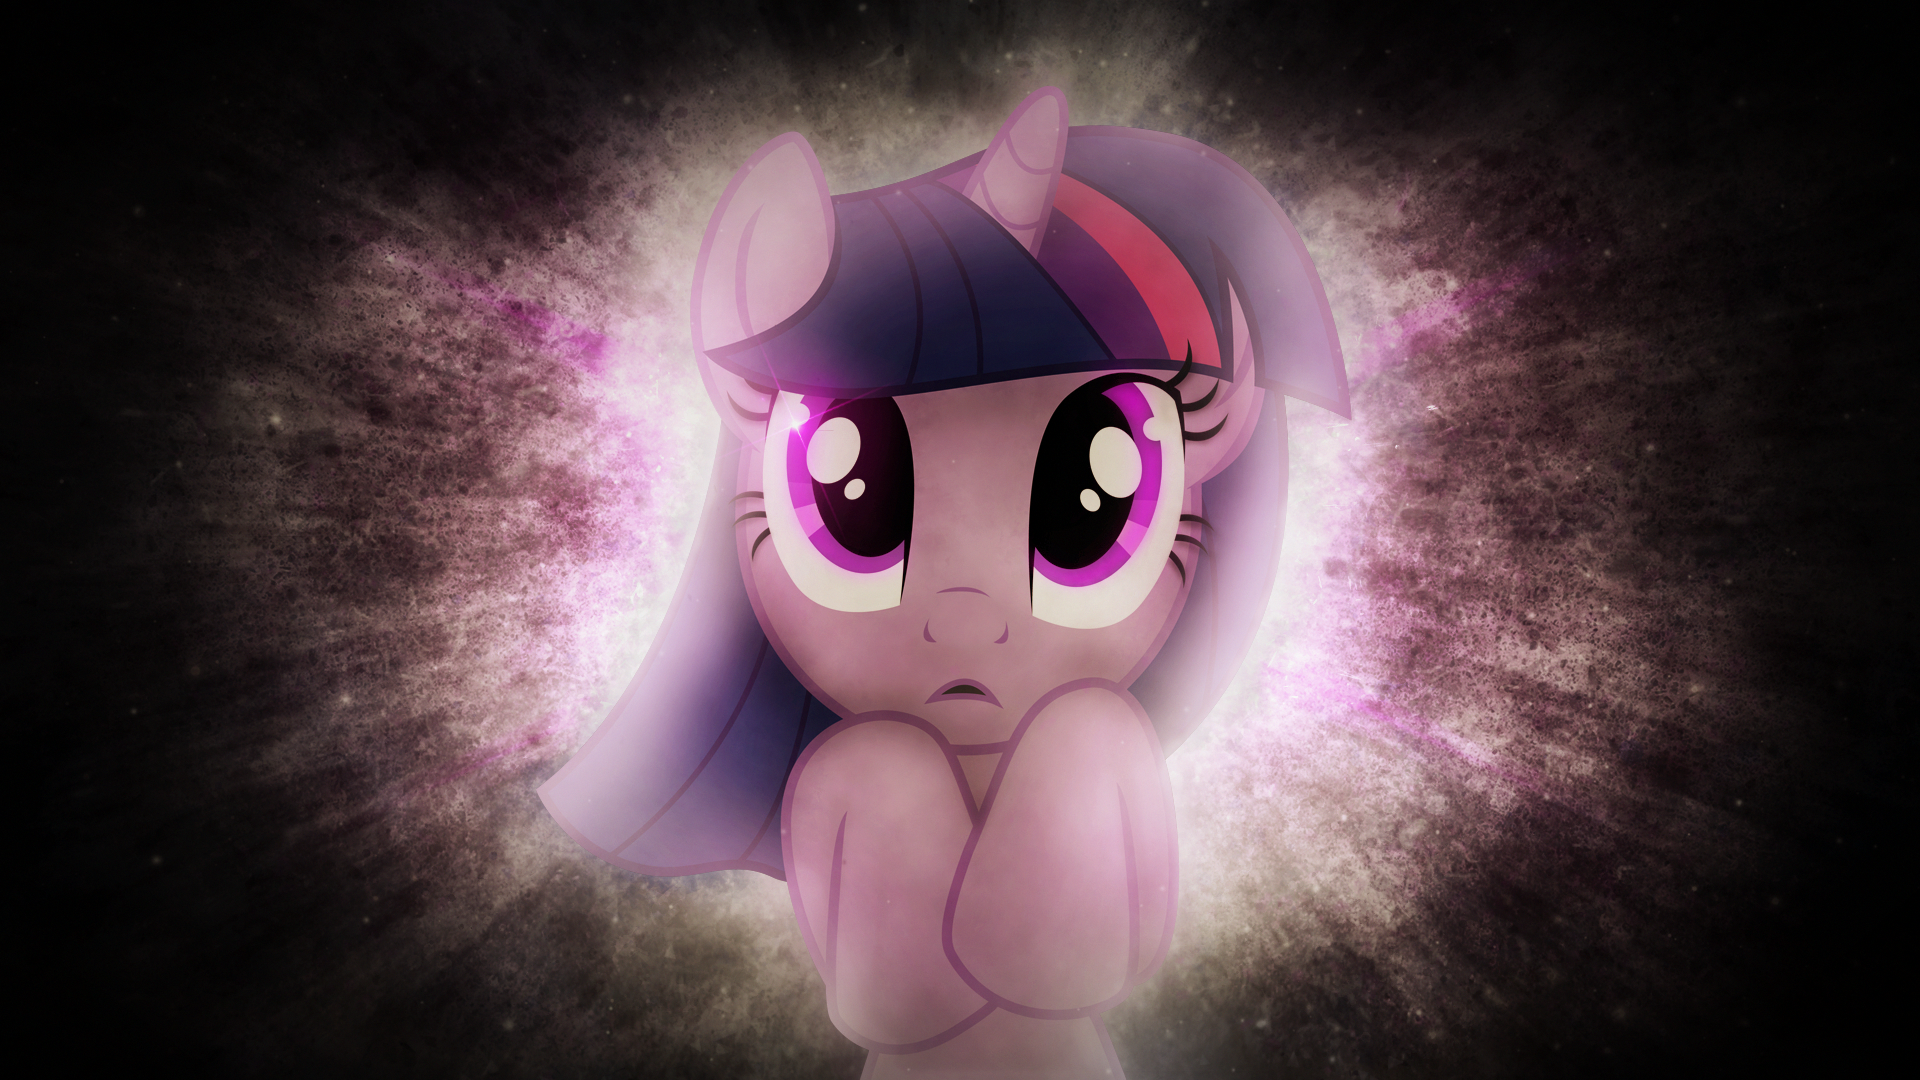 Wallpaper ~ Twilight Sparkle. by ErisGrim and Mackaged